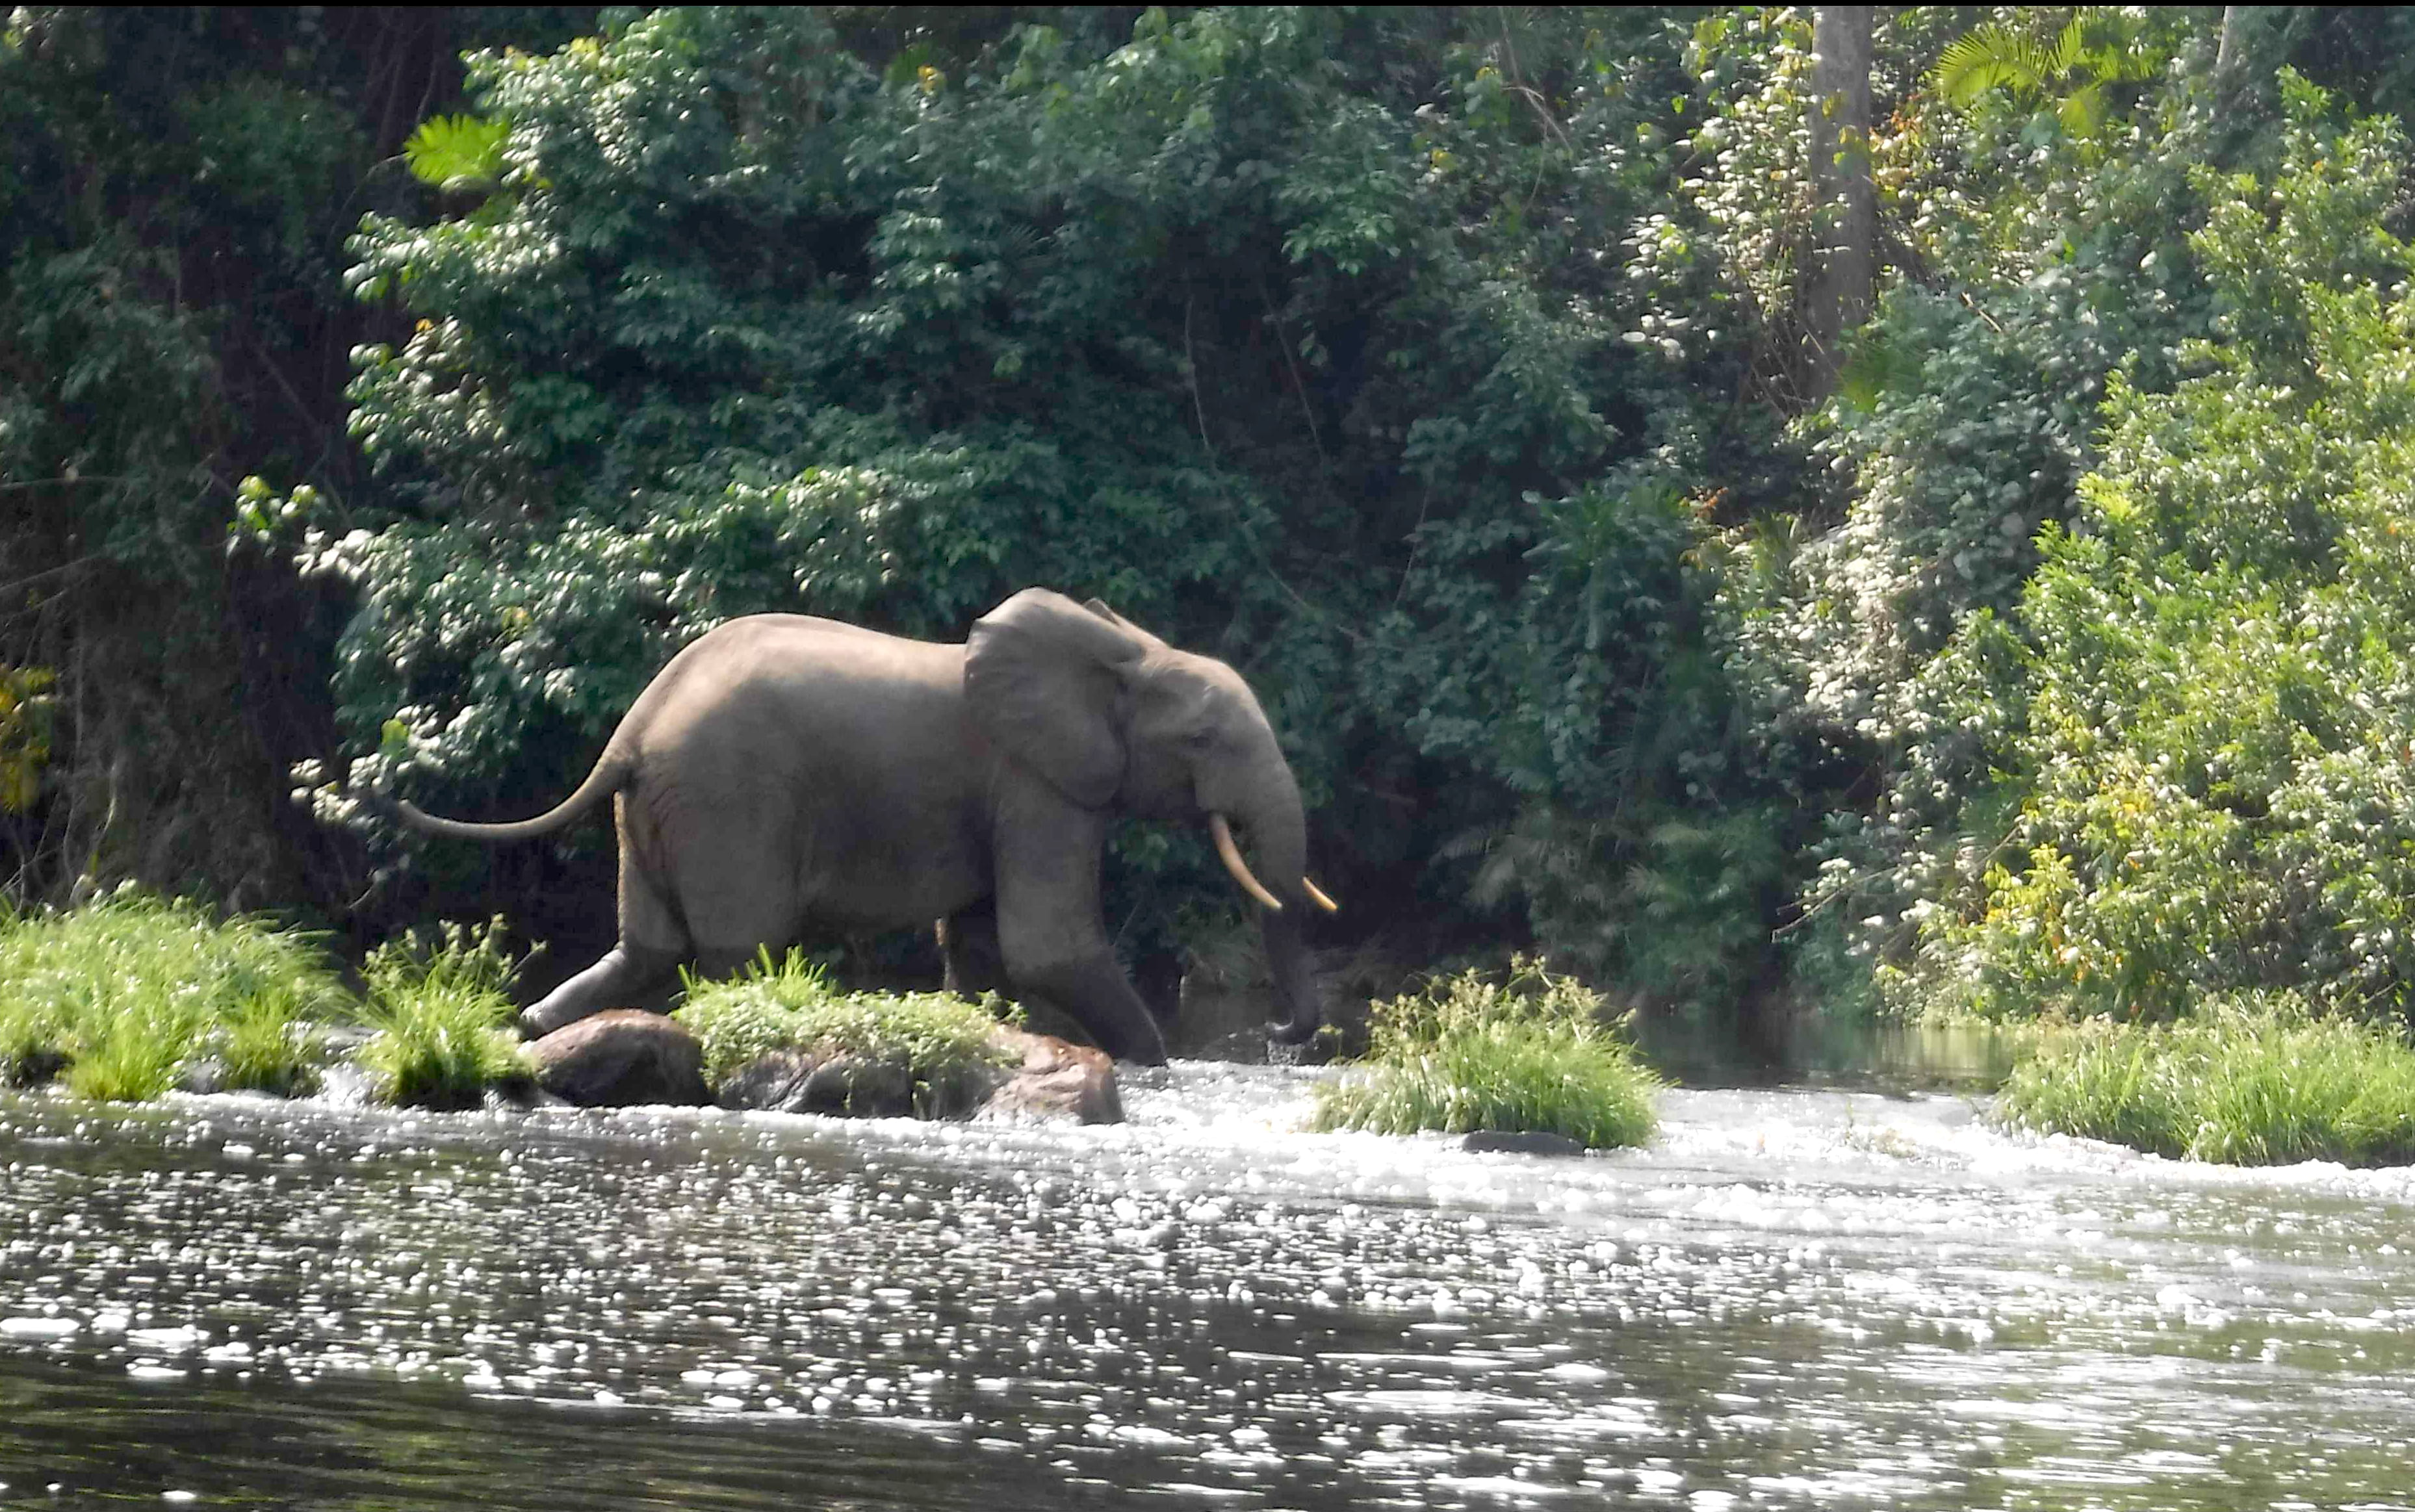 An elephant with large tusks walks into a small river with a dense forest in the background